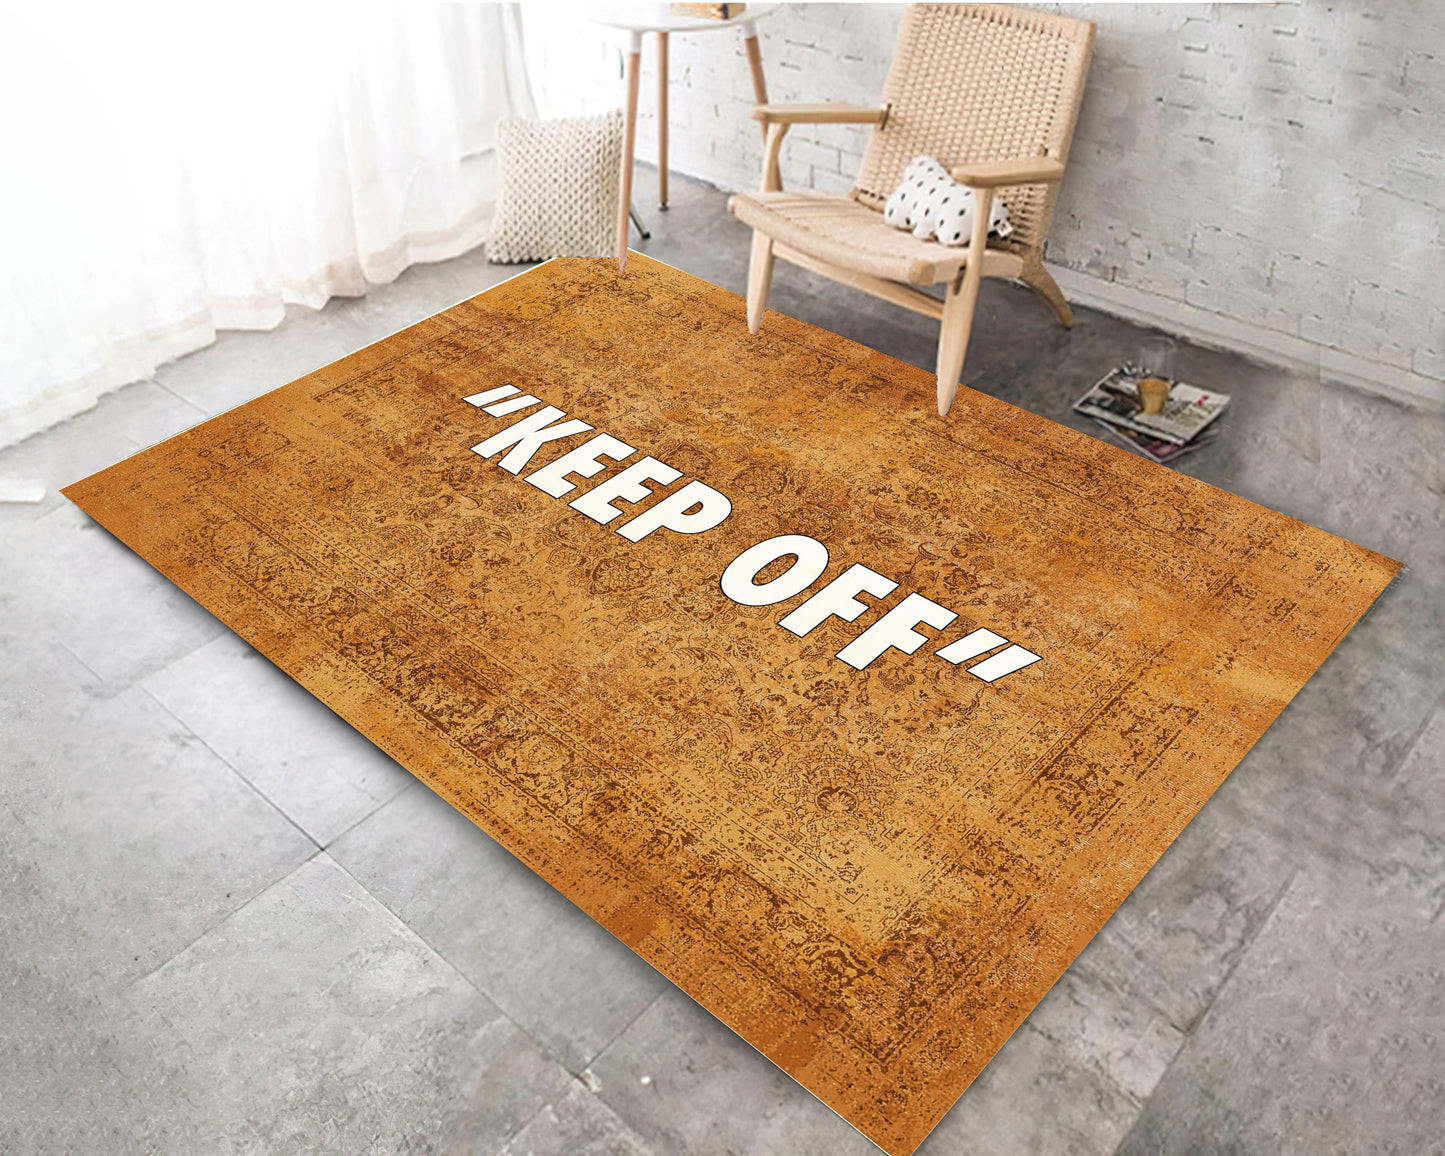 Brand Rug, Keep Off Themed Carpet, Keepoff Text Mat, Sneaker Room Rug, Exclusive Area Rug